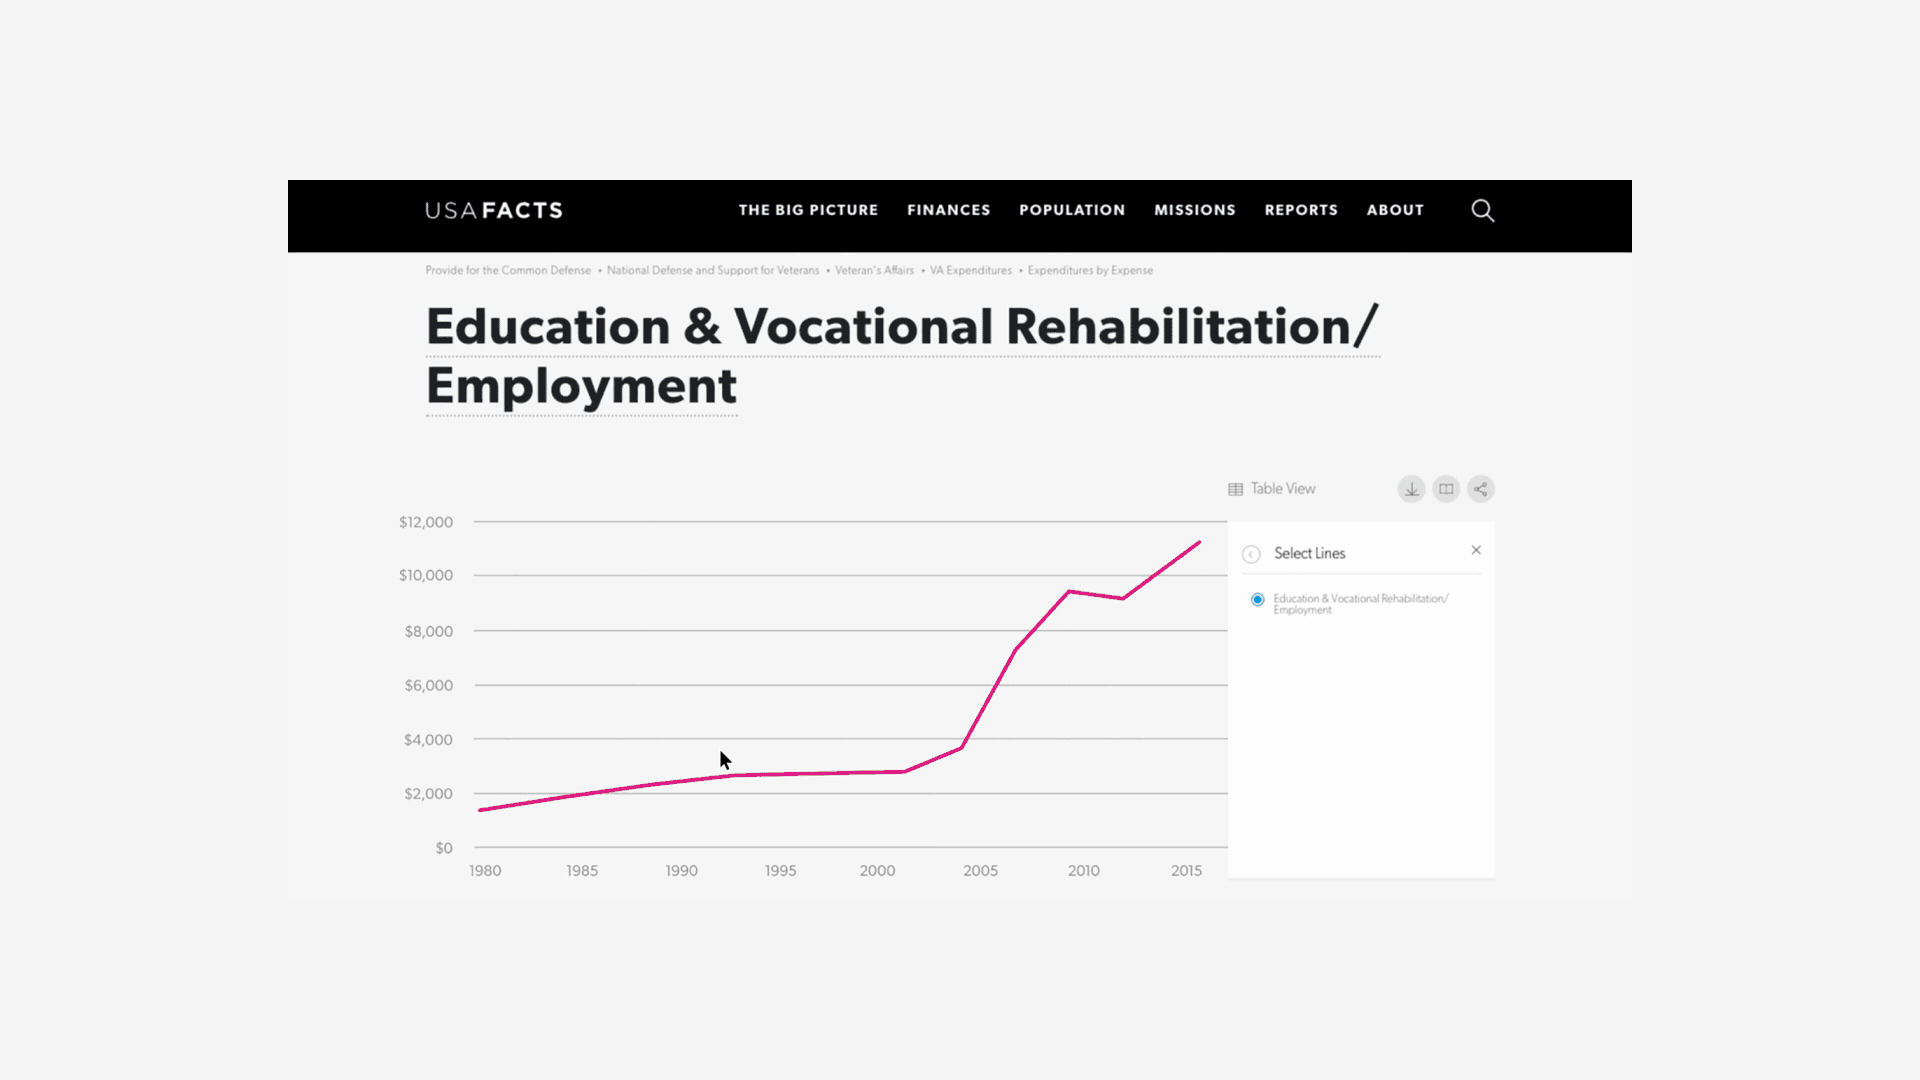 Animated GIF on the USAFacts website of education and vocational rehabilitation and employment spending in the US from 1980 to 2015.